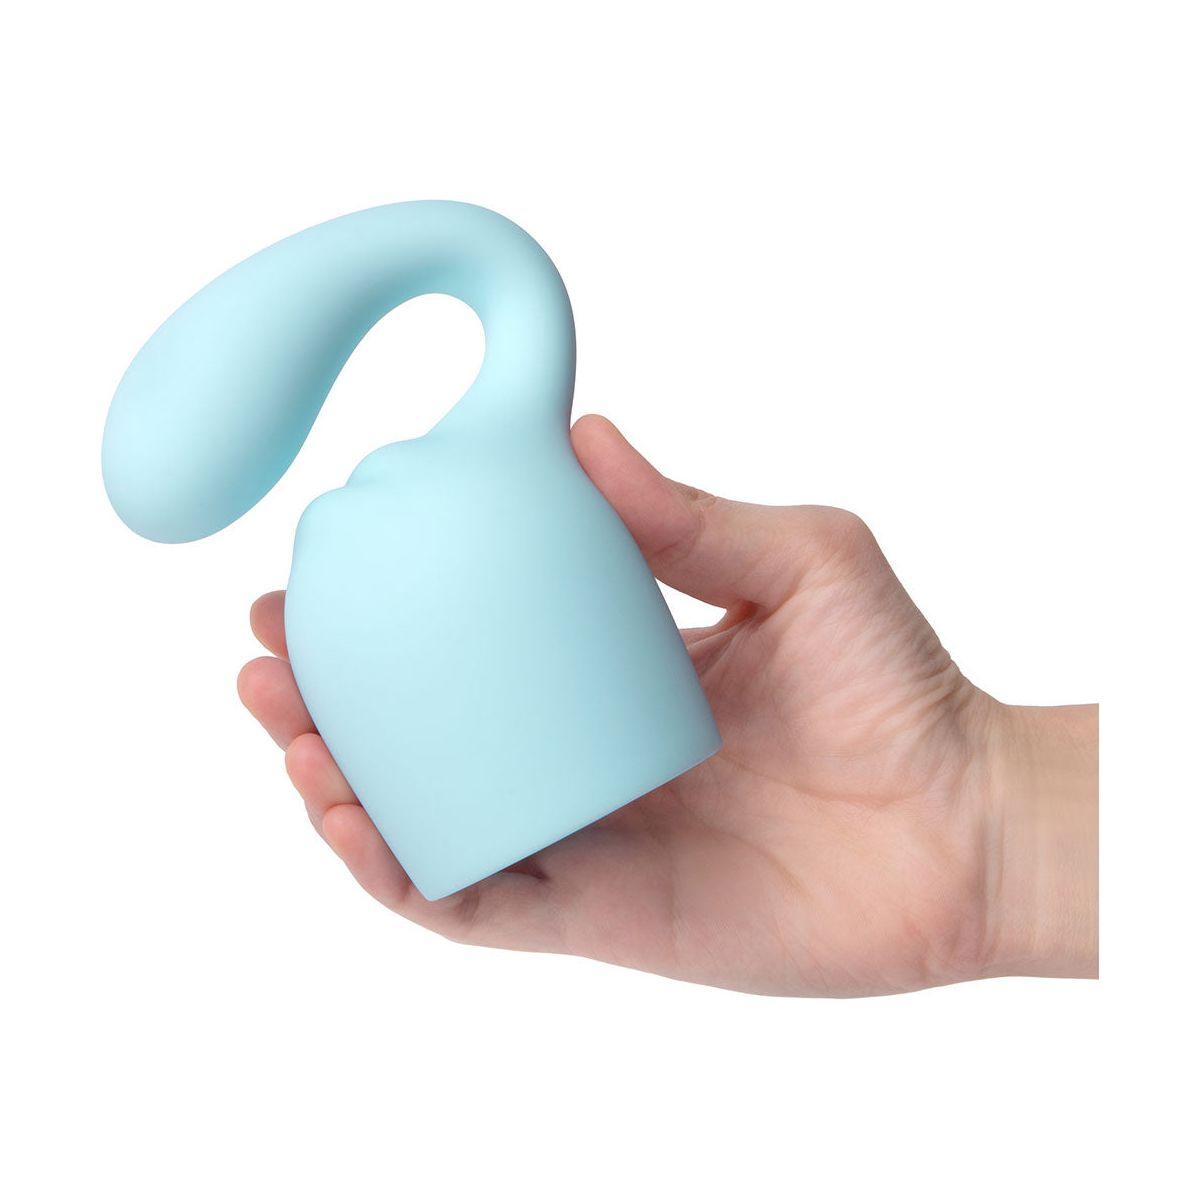 Le Wand Glider Weighted Silicone Attachment - shop enby